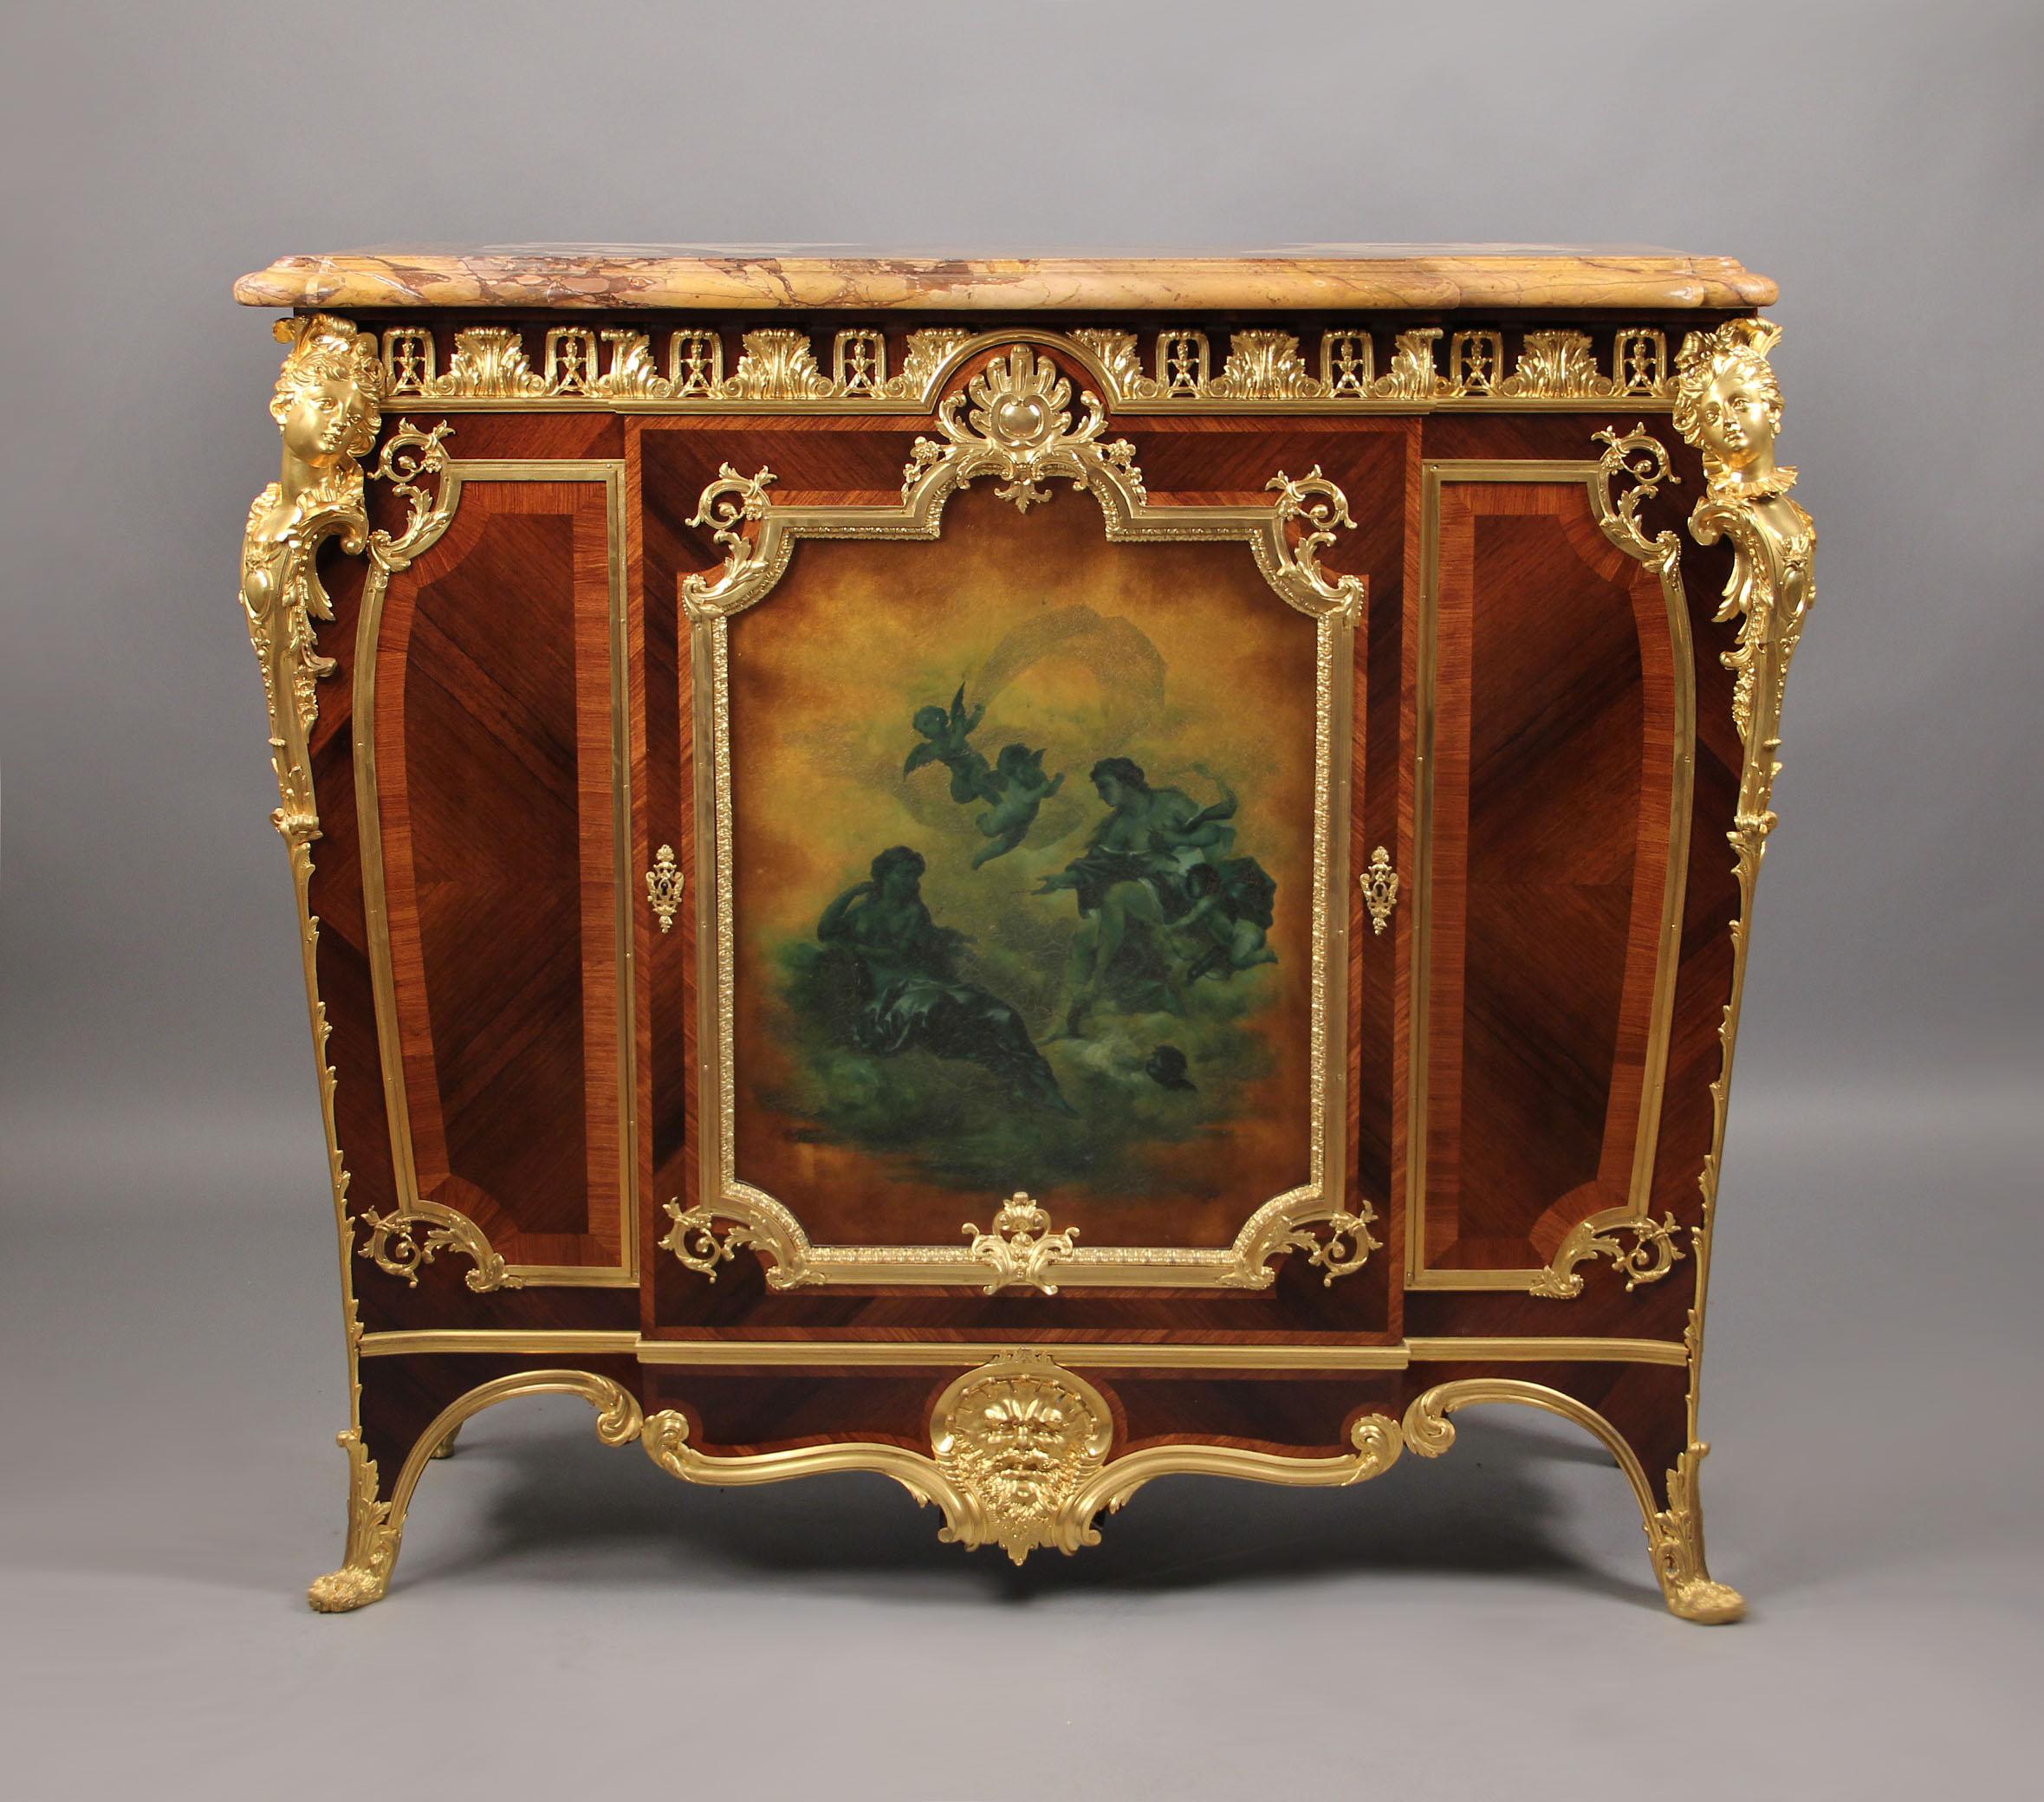 A very fine late 19th century gilt bronze-mounted Louis XV style Vernis Martin cabinet.

By Joseph Zwiener.

The central section finely decorated door panel displaying an allegorical 'Vernis Martin' scene, within a gilt bronze banded frame. With